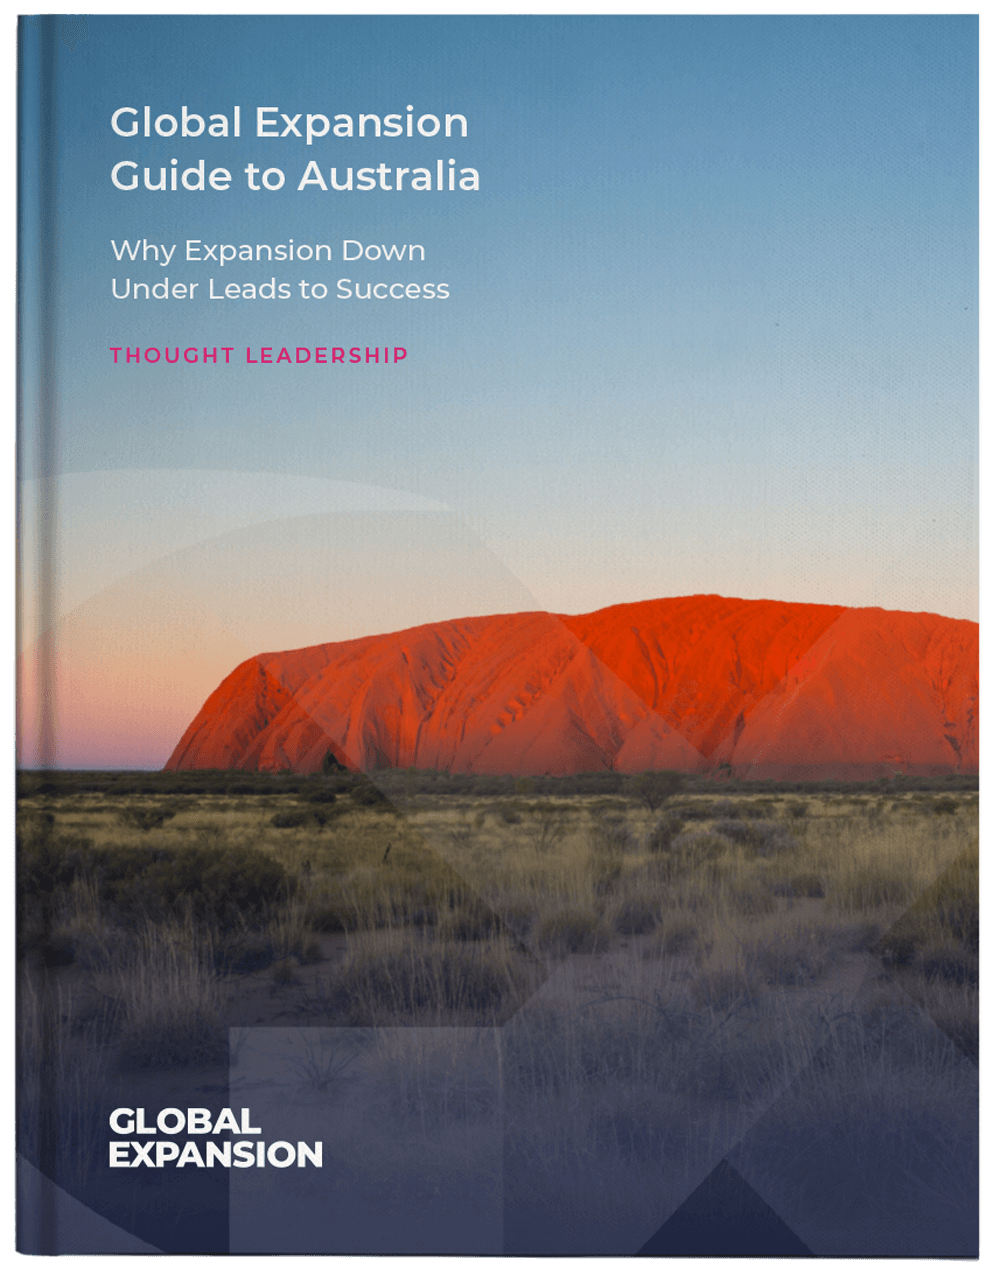 GX_Global-Expansion-Guide-to-Australia-Cover